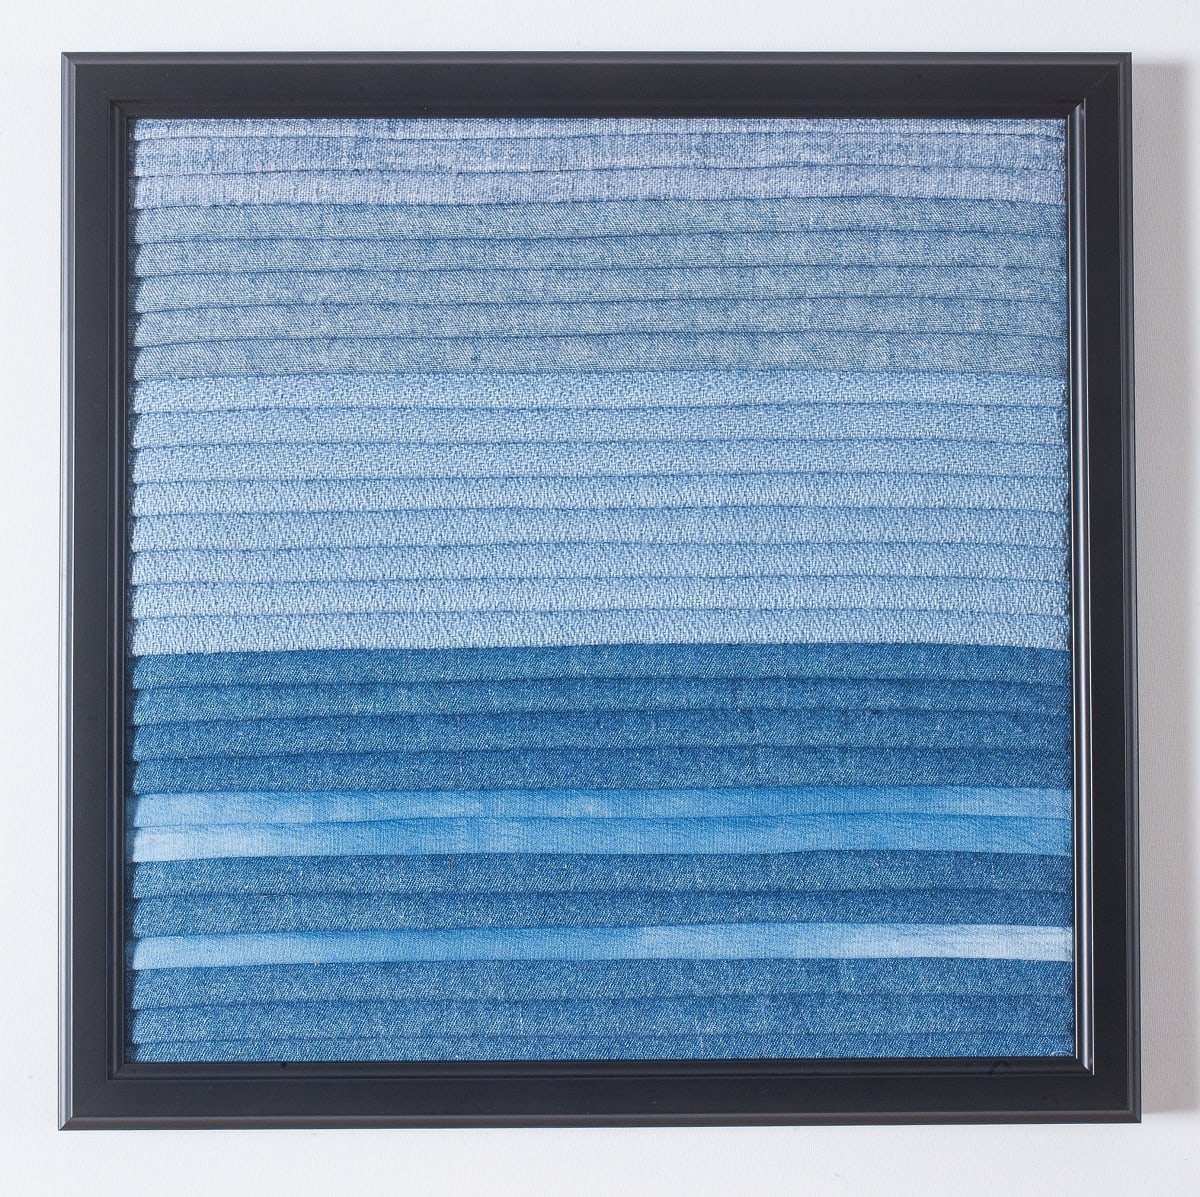 Synesthesia #10 Cerulean Blue by Lesley Turner  Image: Lesley Turner, 'Synesthesia #10 Cerulean Blue', 2017, 13"x13"x0.5". Cotton fabric and threads. Working monochromatically I focused on expressing the color’s radiating energy through line and value. Photo: Tony Bounsall Photo-Design